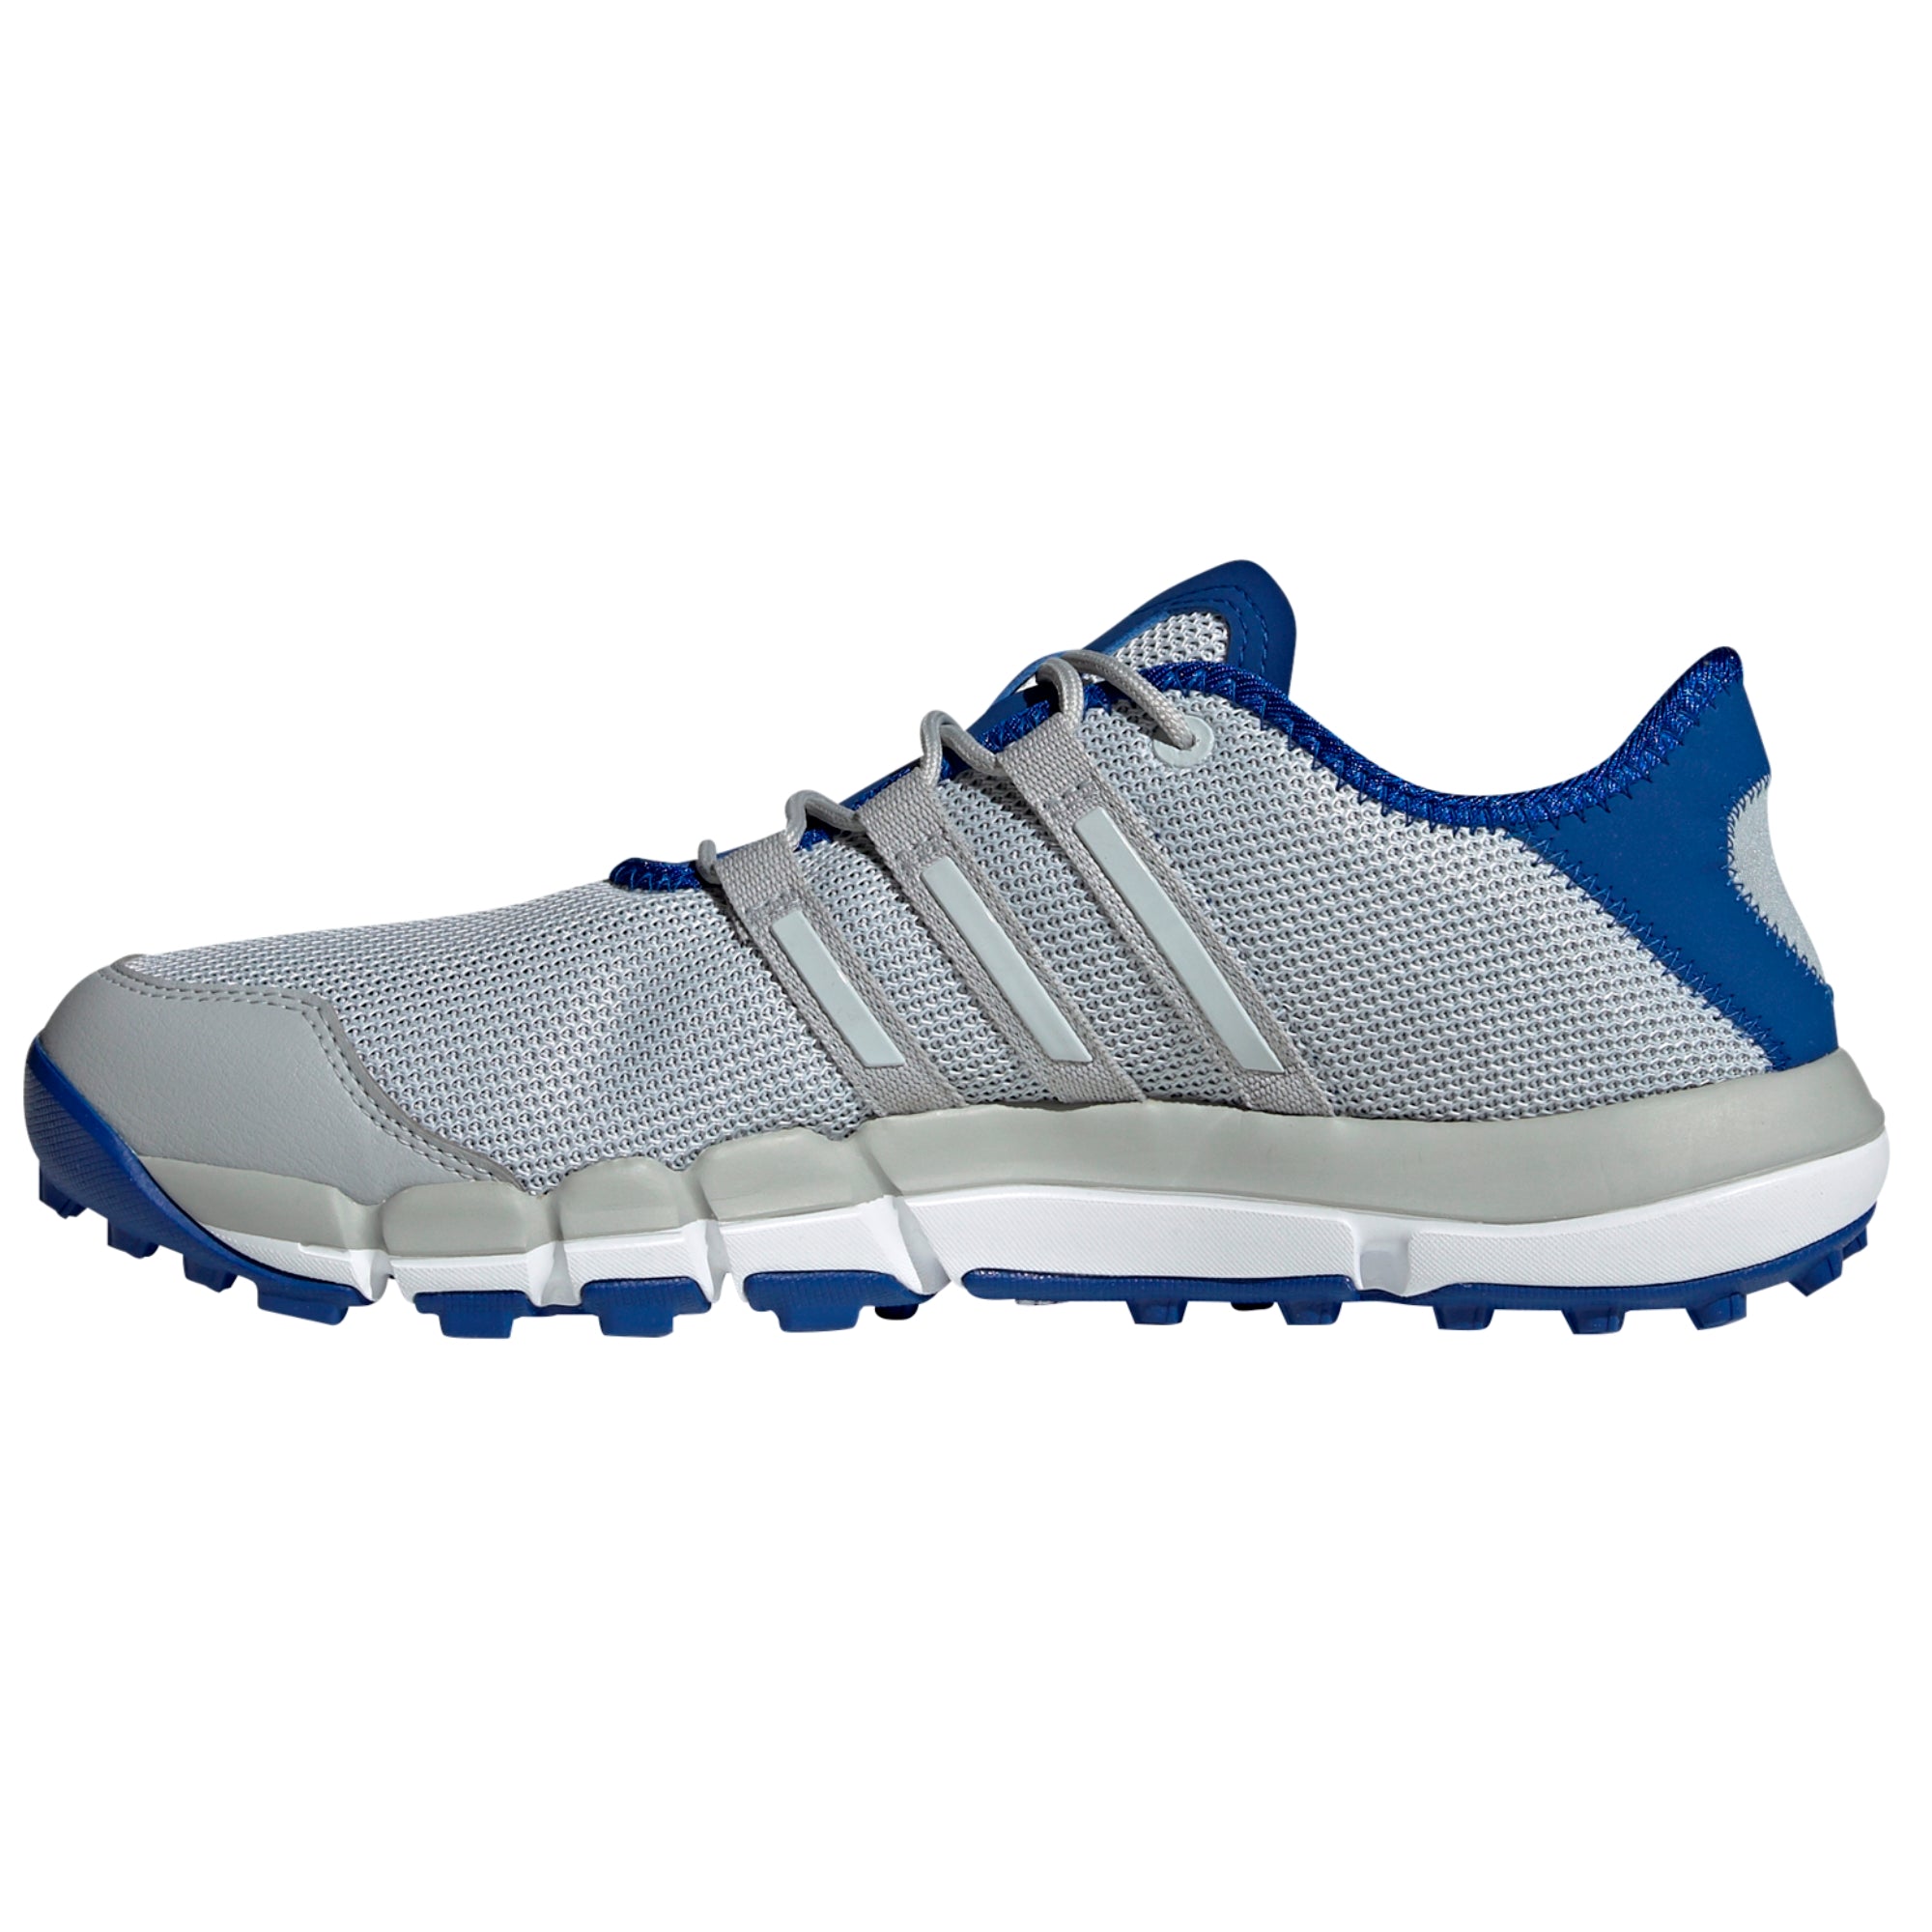 adidas climacool golf shoes 9.5